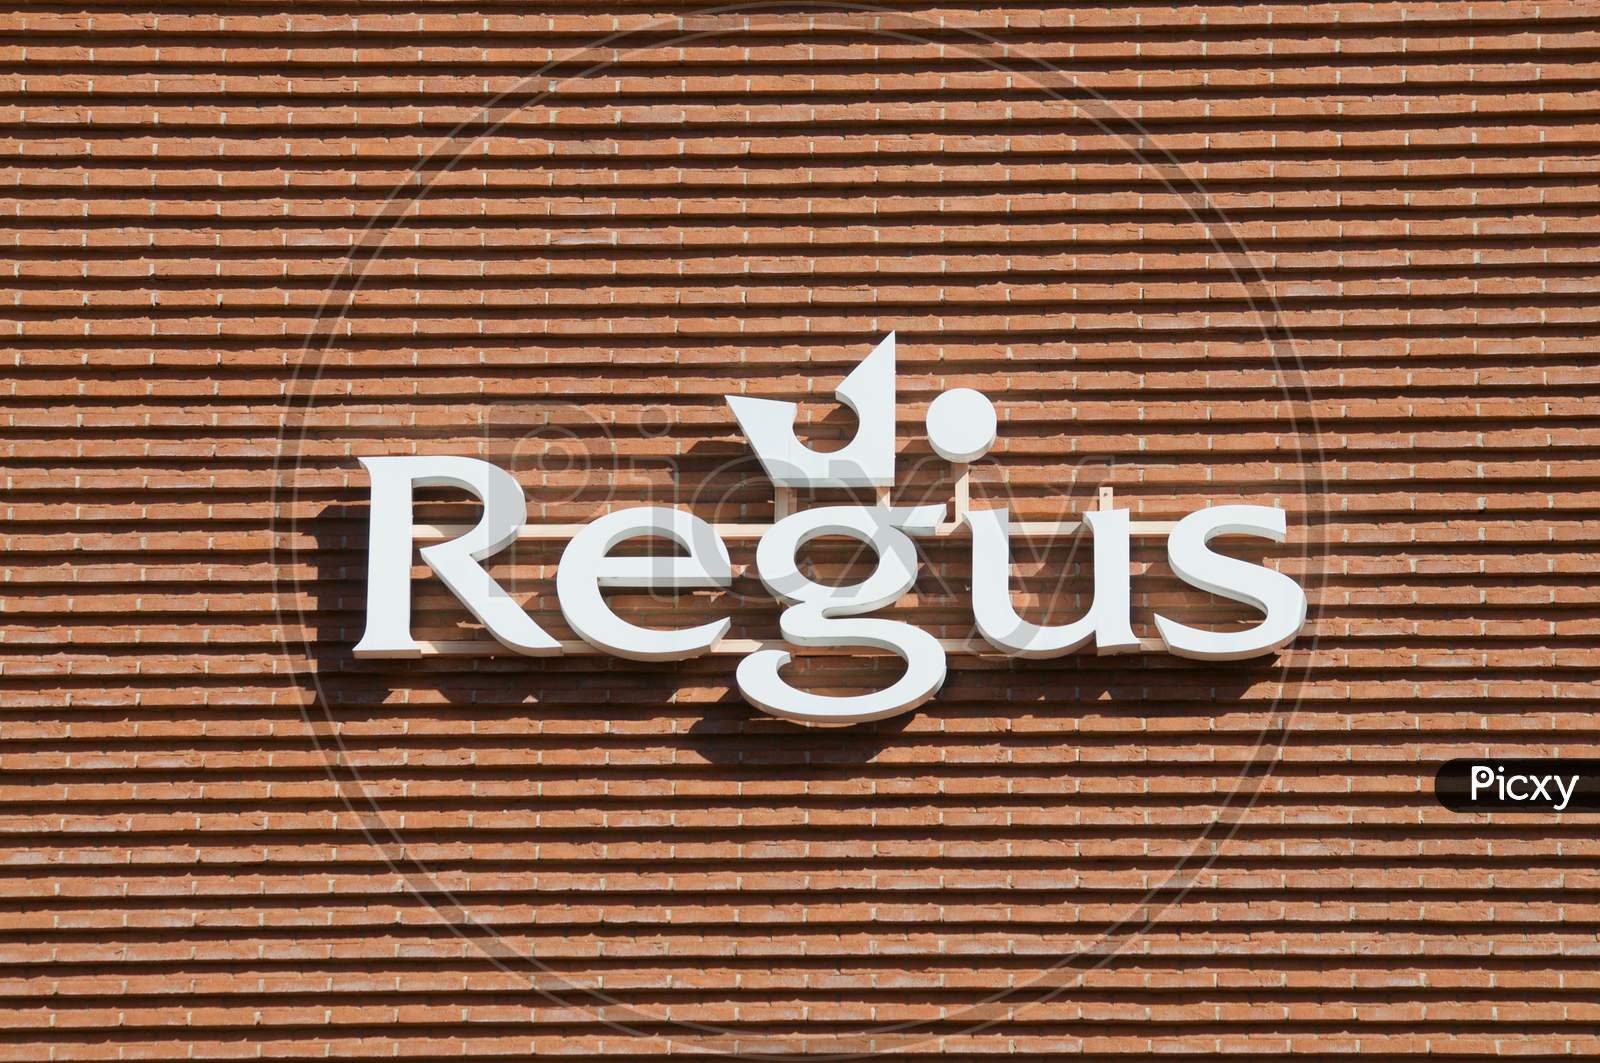 Regus Sign Hanging On A Building In Lugano, Switzerland